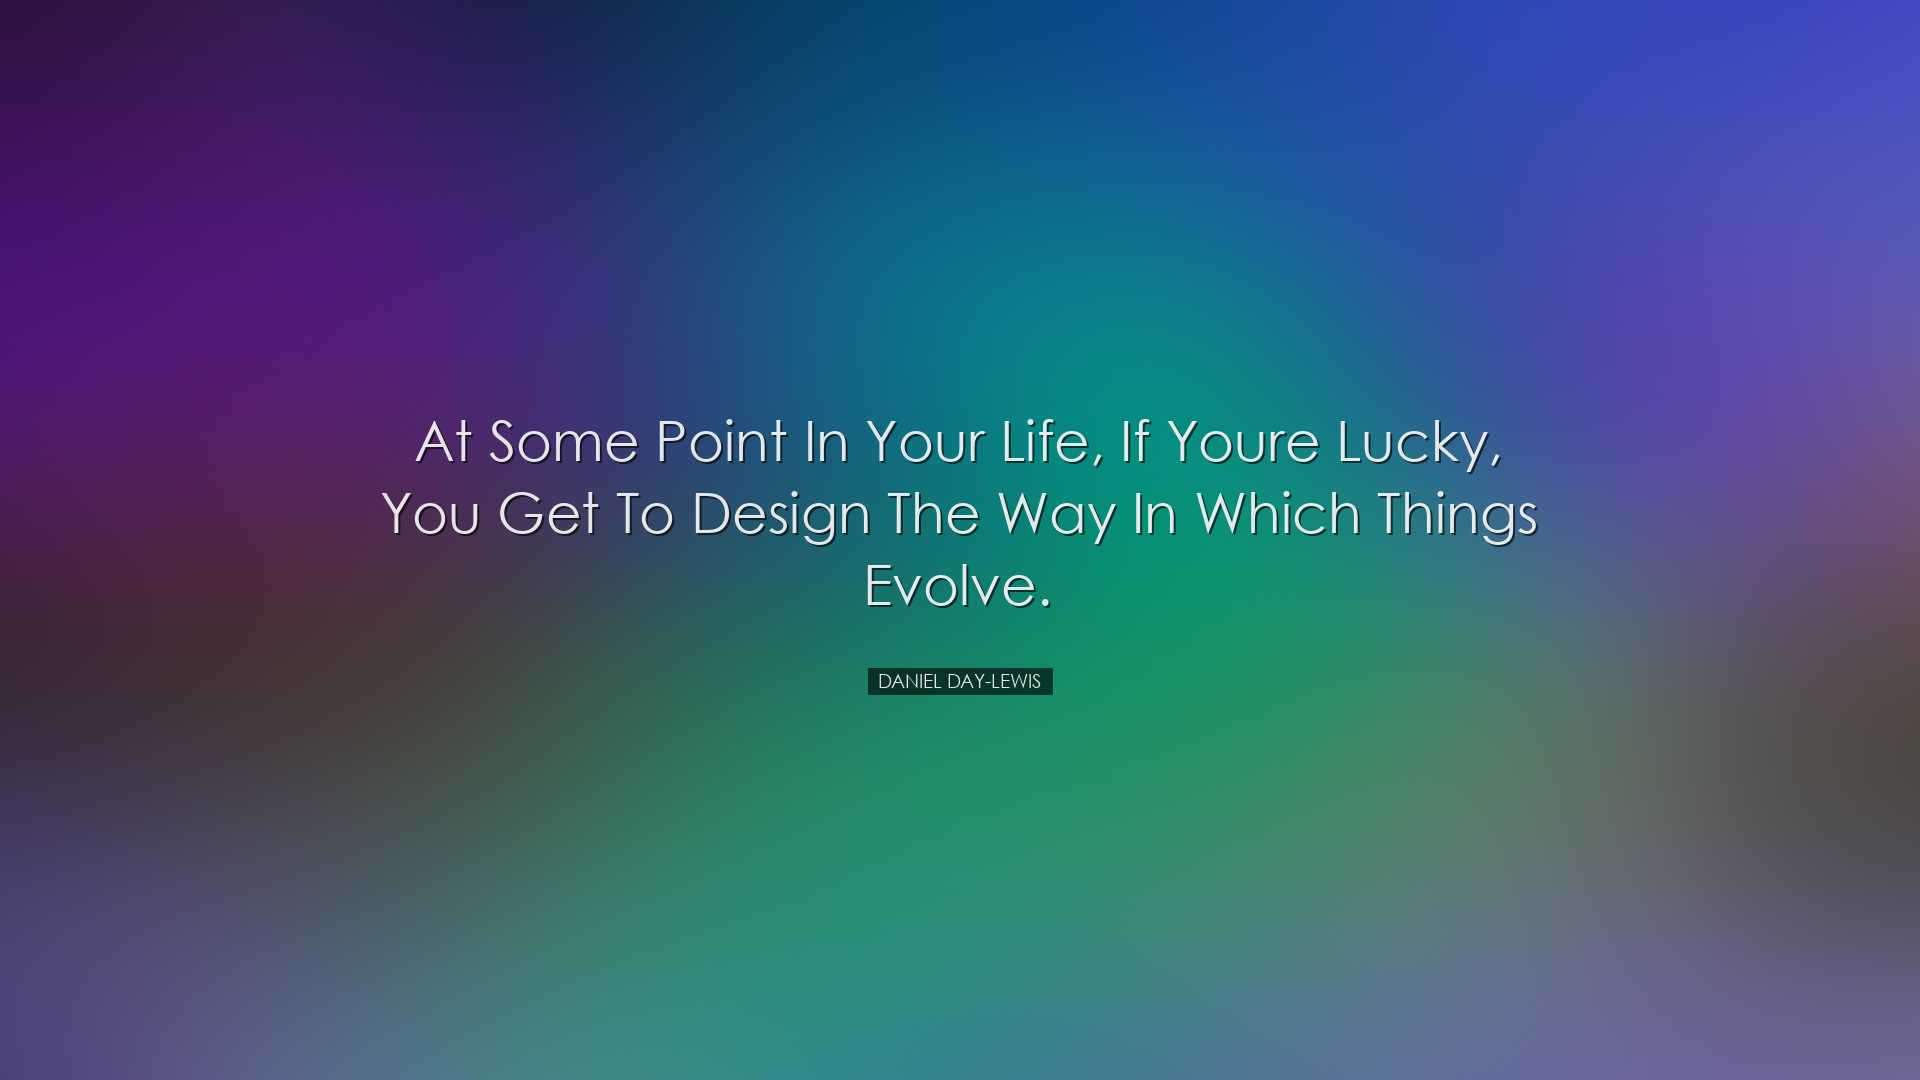 At some point in your life, if youre lucky, you get to design the